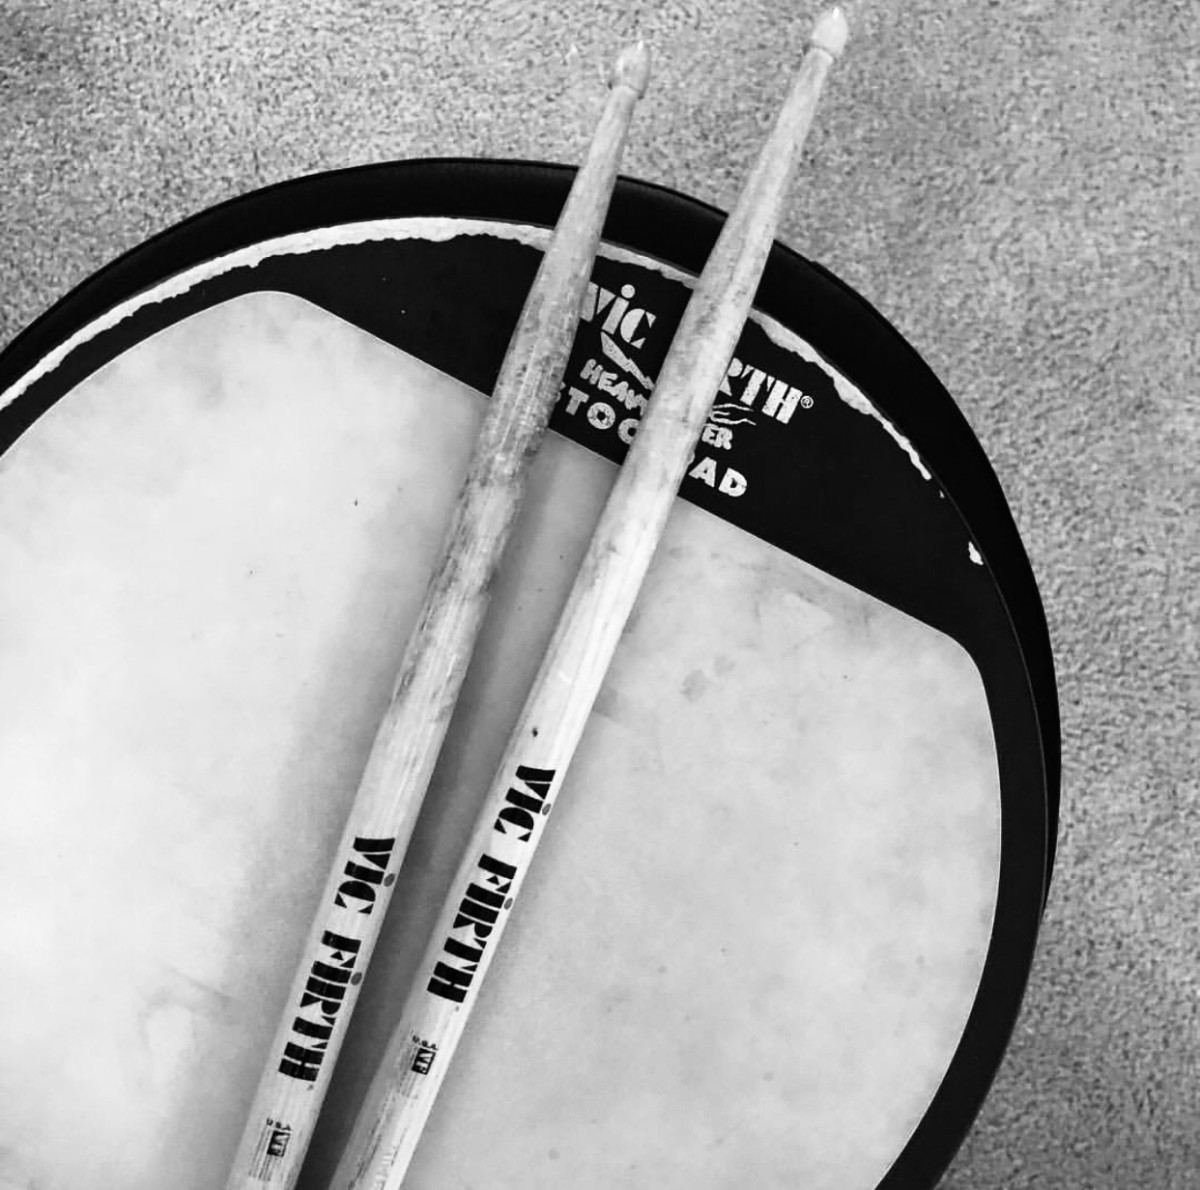 Practice, practice, practice! Practice pads and sticks are relatively cheap and a good way to get started with drumming. 